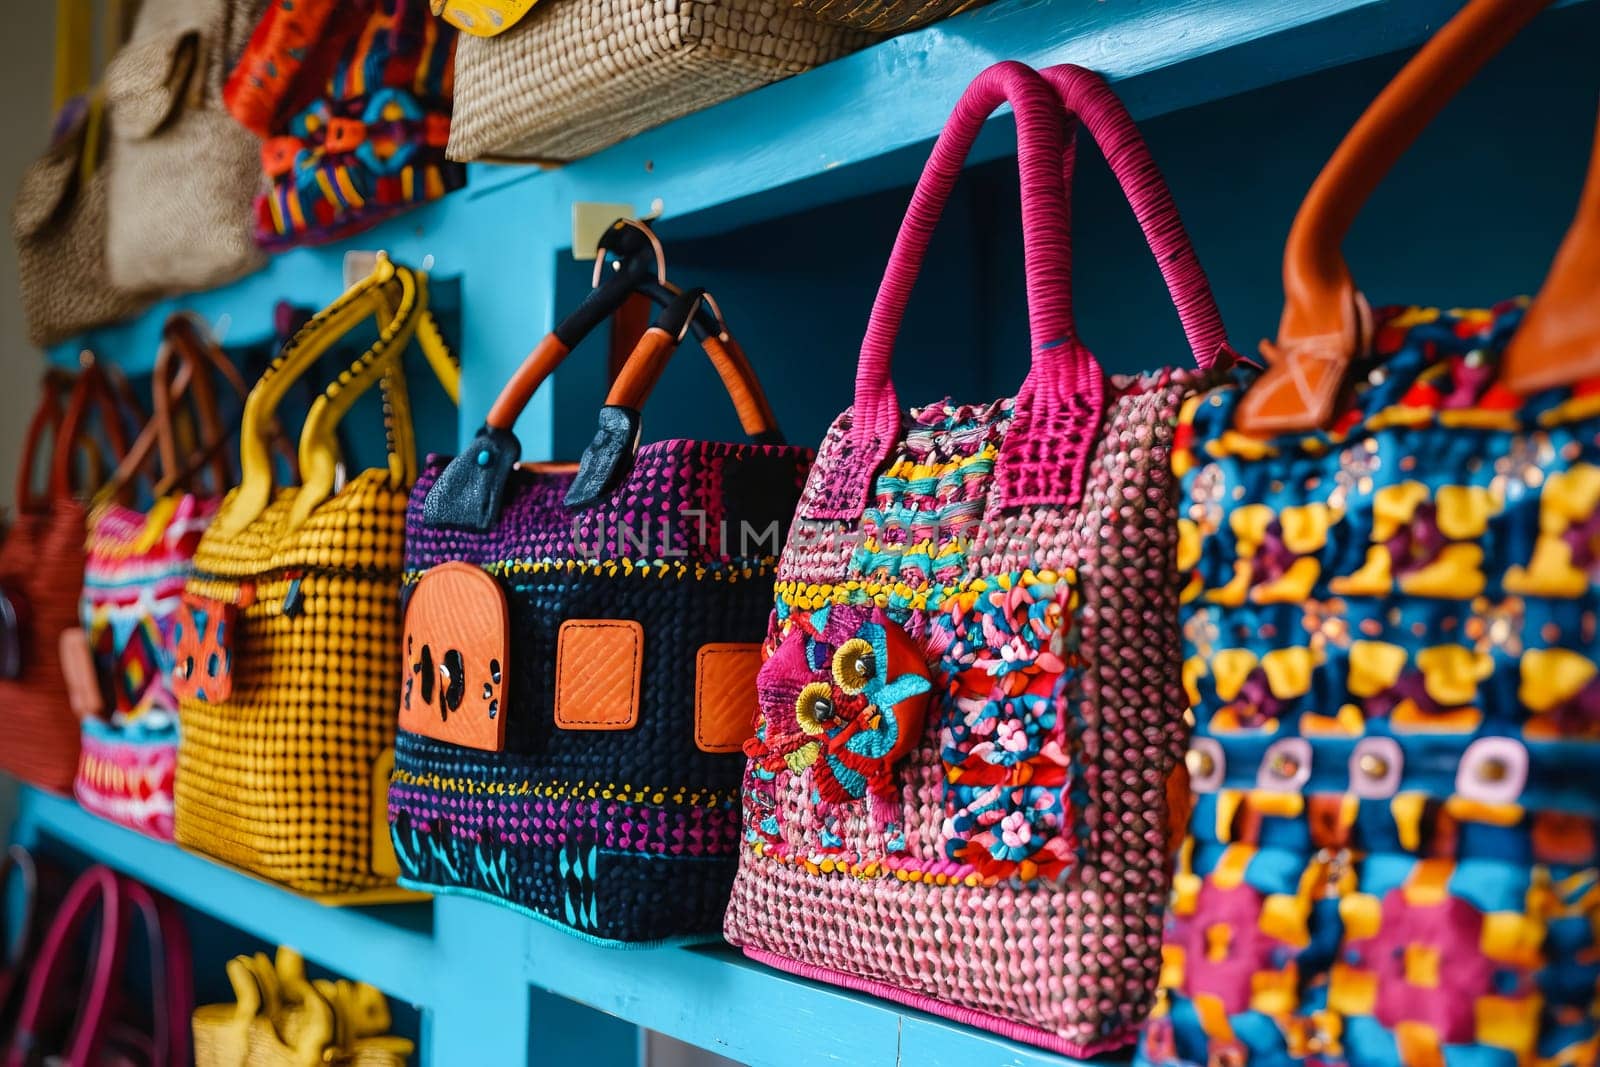 A row of colorful purses are displayed on a blue shelf. The purses are made of different materials and have various designs, including floral and checkered patterns. Generative AI